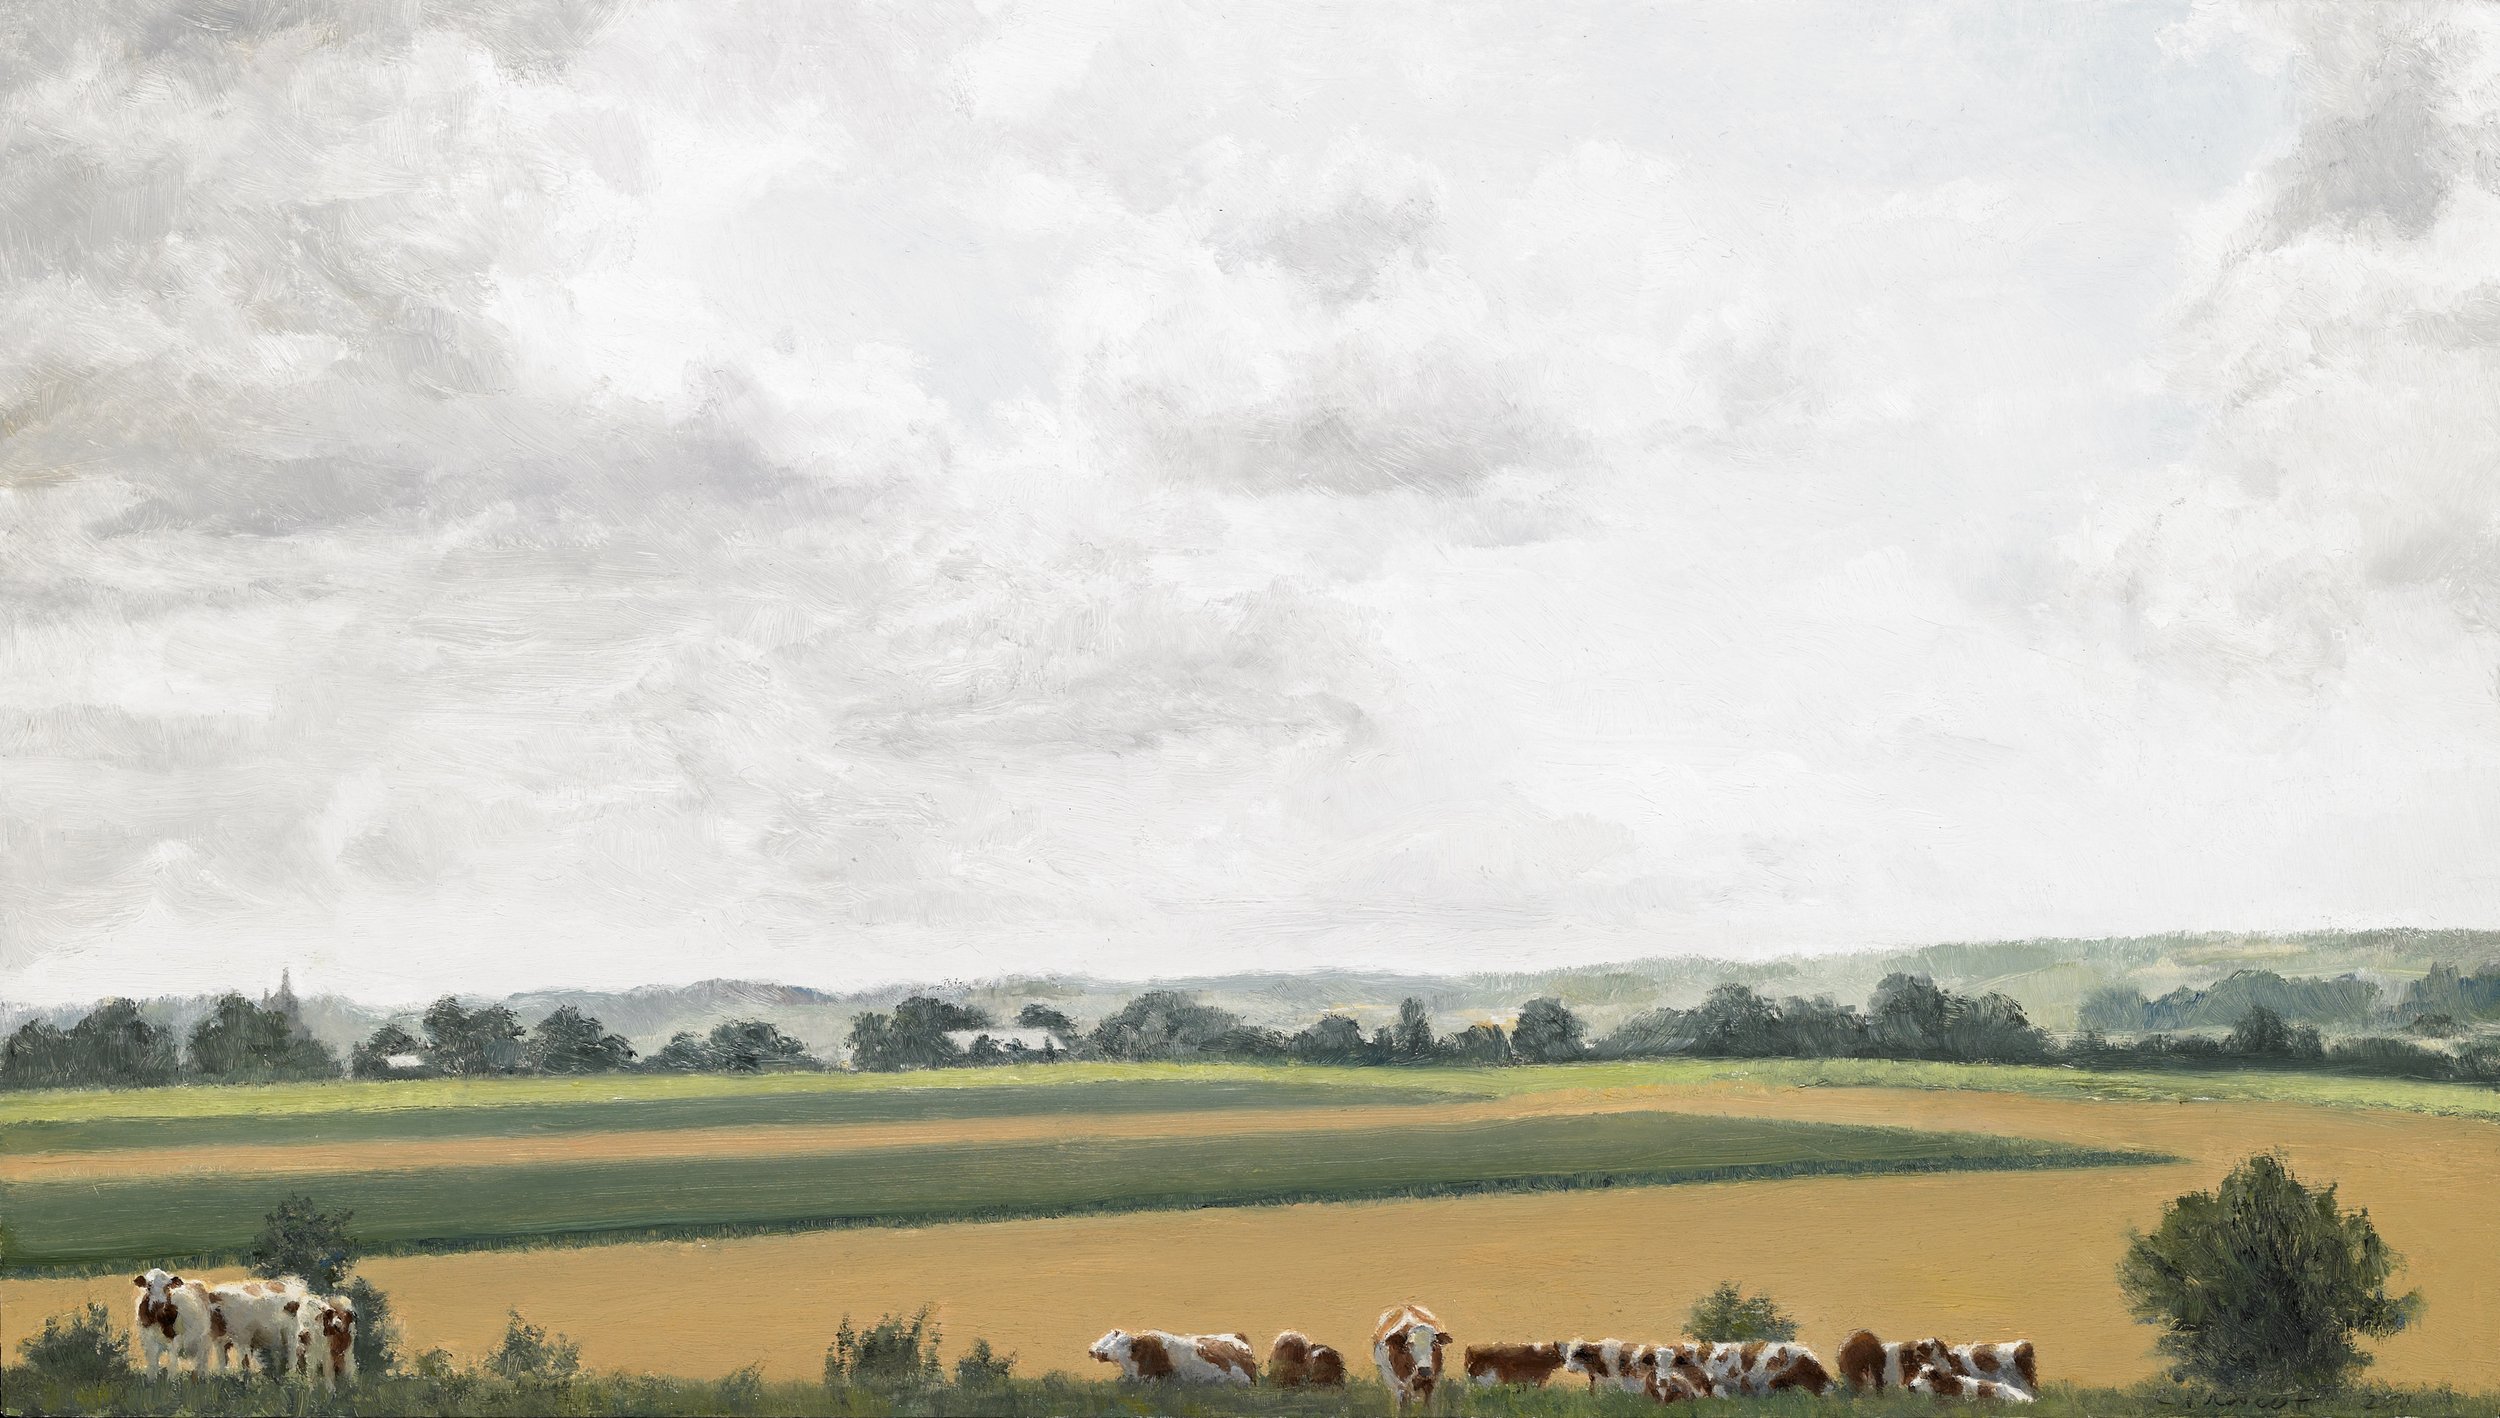   Cows at Home II, Bonning France , 2014, 8” x 14”, Oil on Panel, 2014  Private Collection 